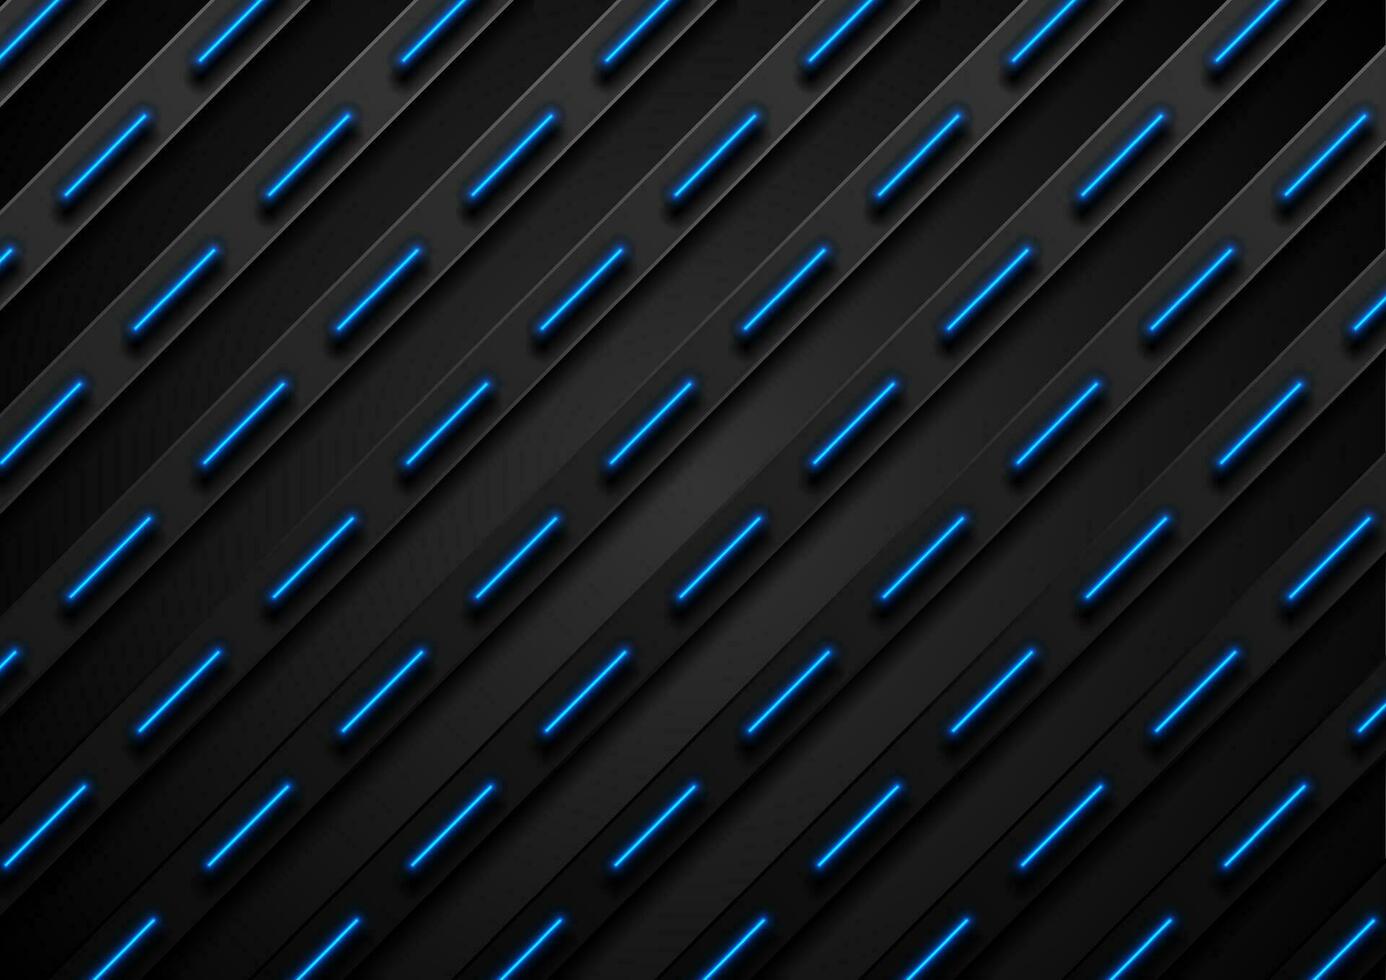 Black and glowing neon blue stripes abstract tech background vector